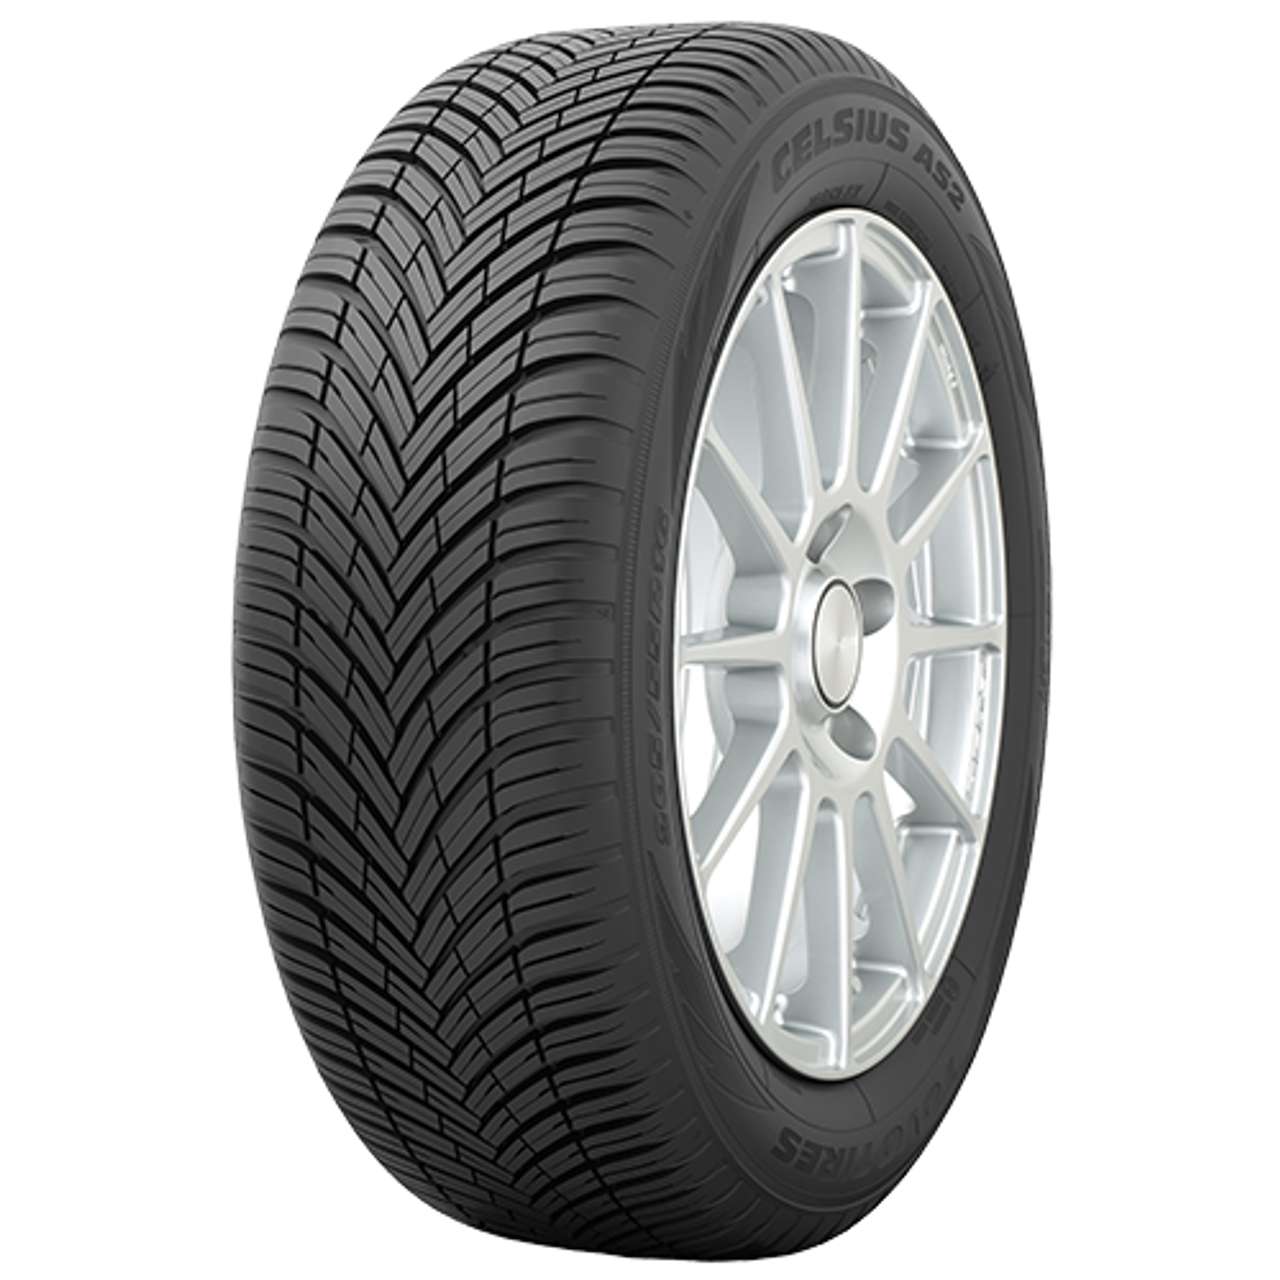 TOYO CELSIUS AS2 225/55R18 102V BSW